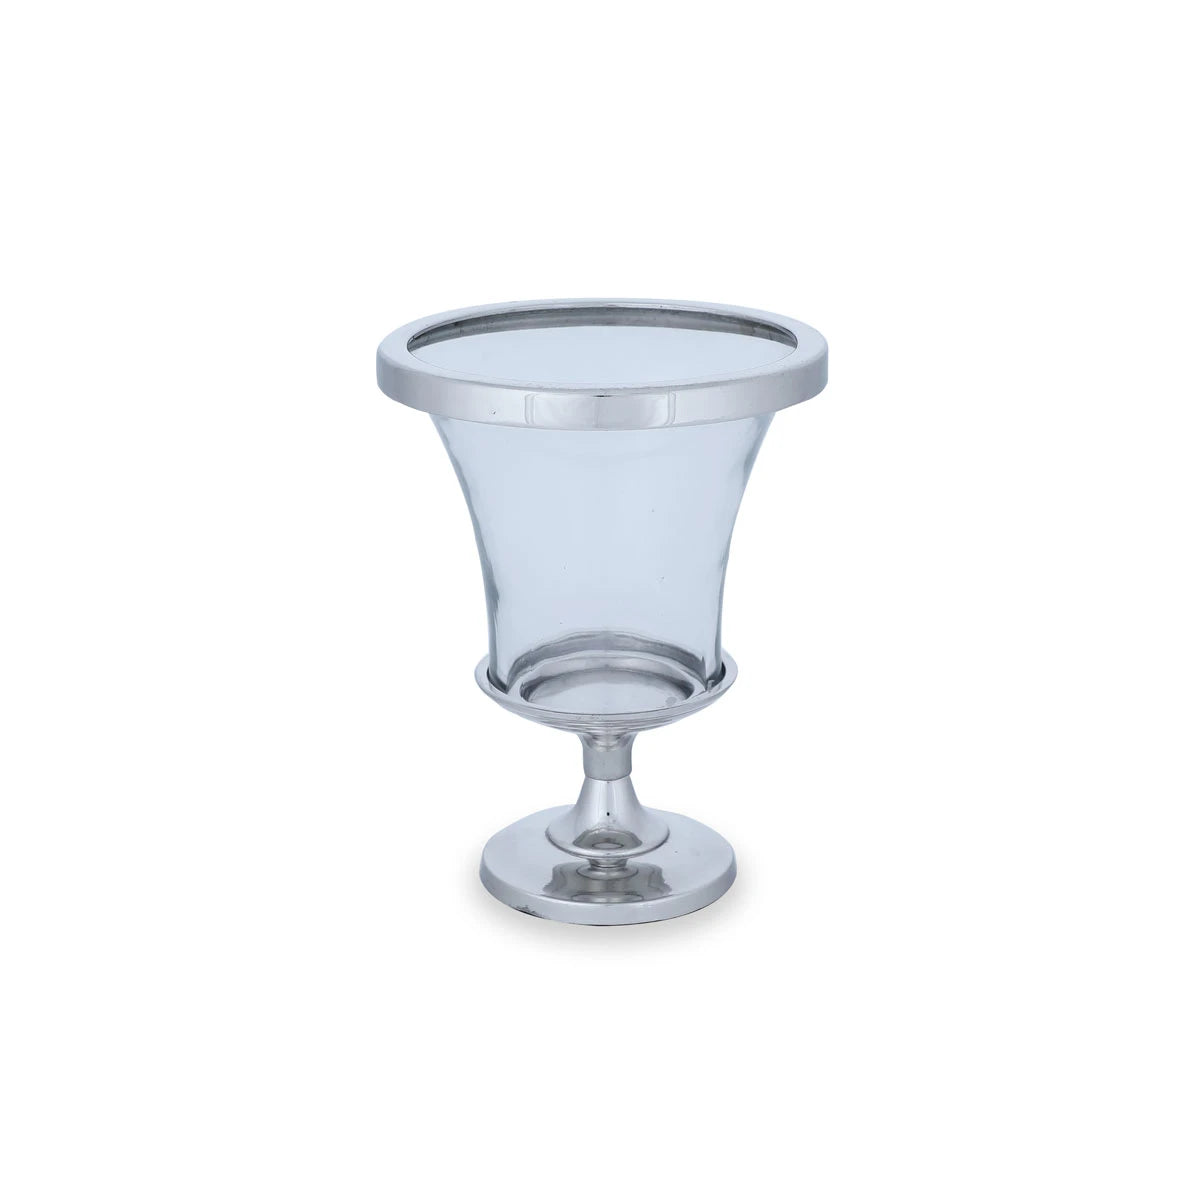 Angled Top View of Glass Candle Holder